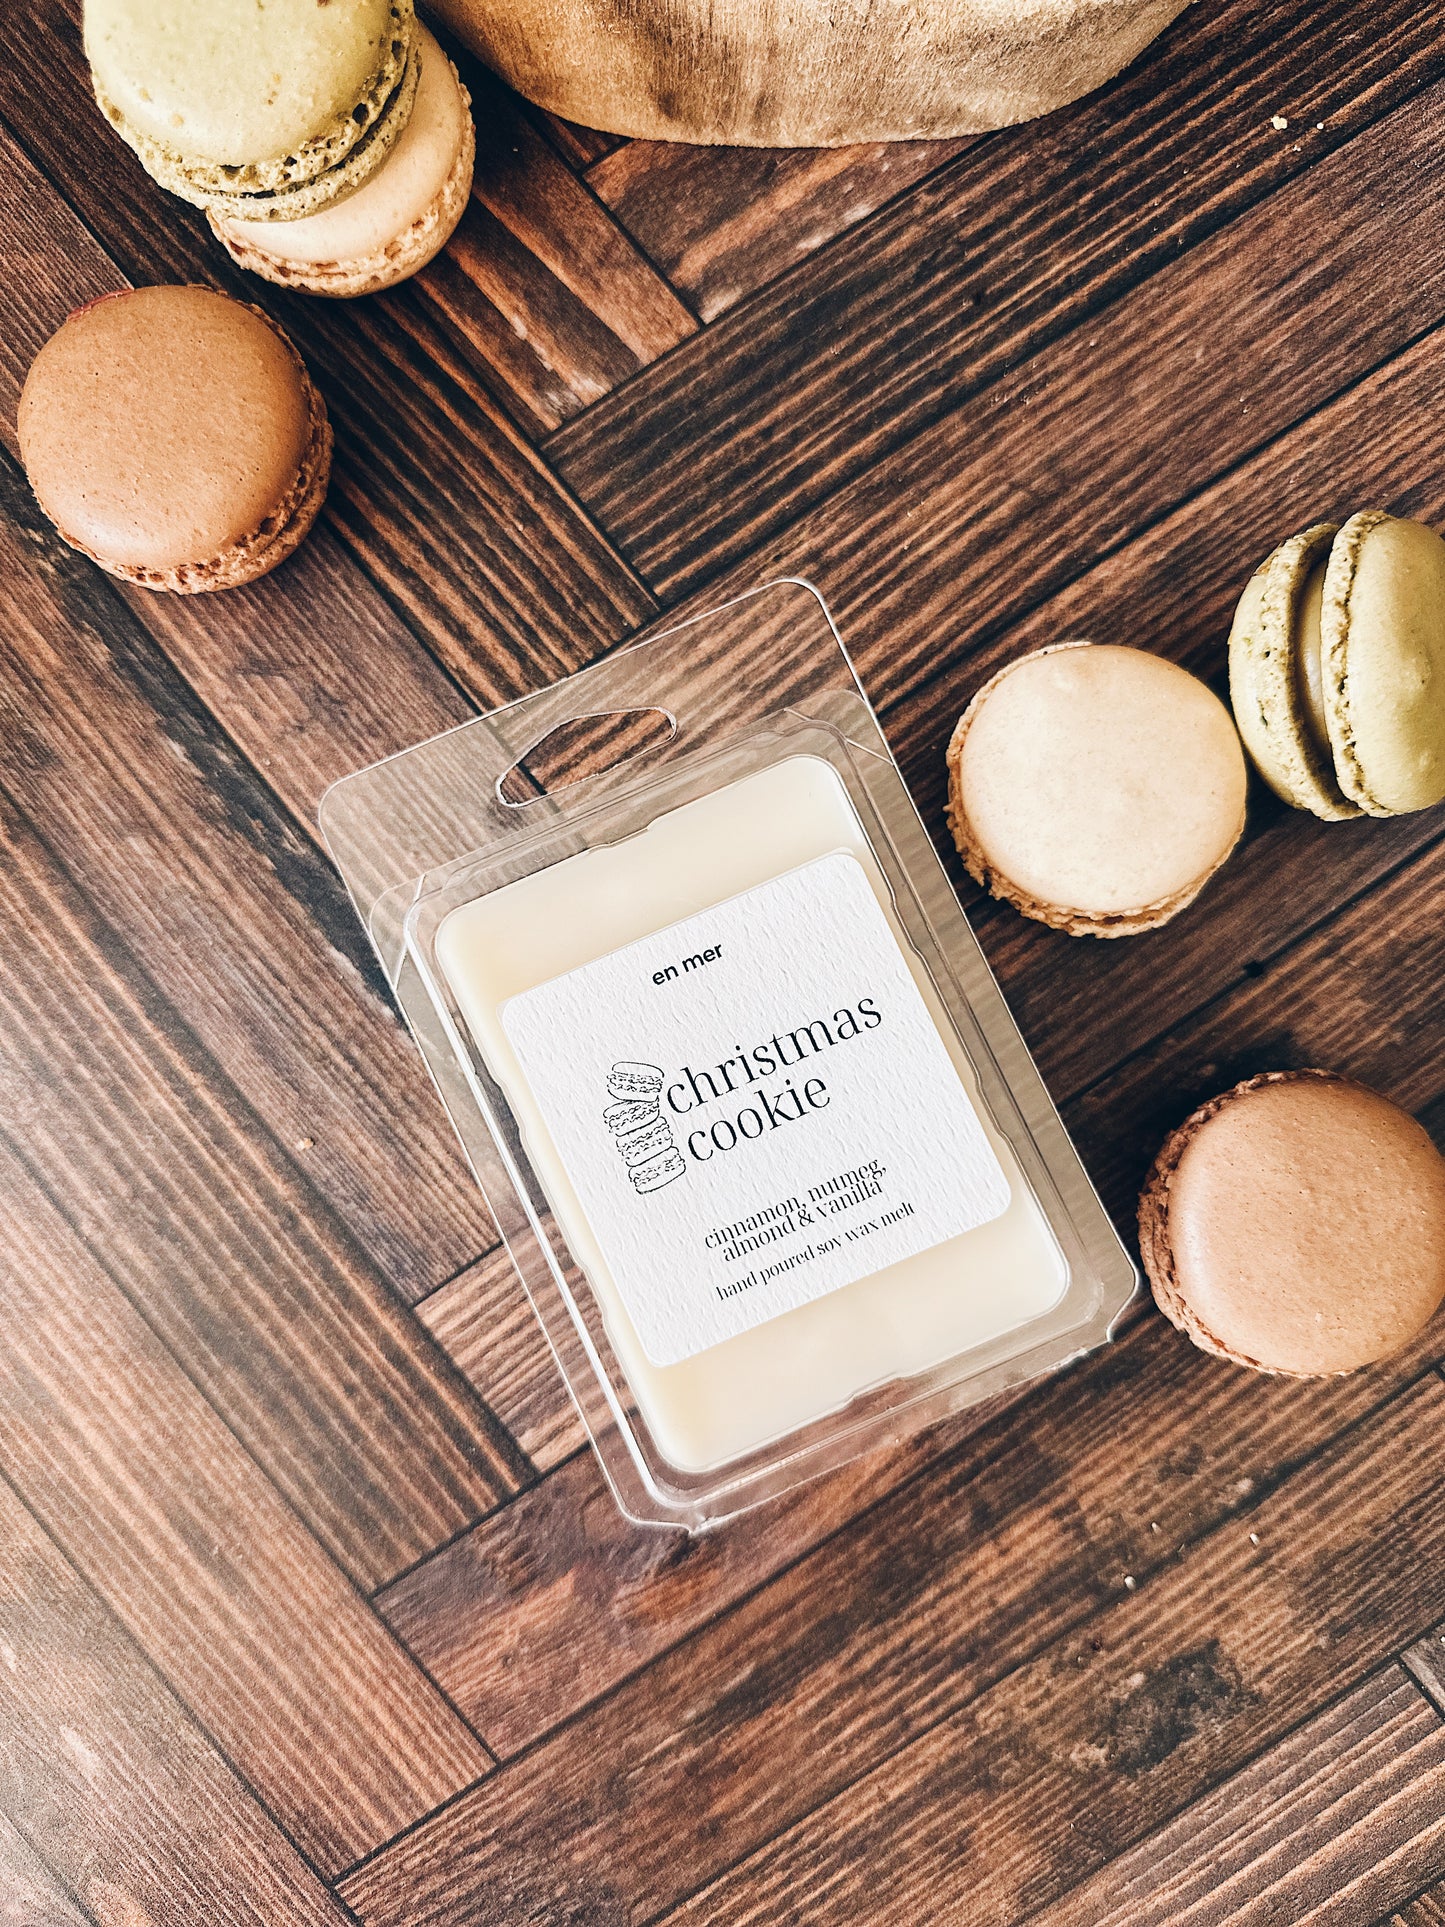 en mer | christmas cookie | soy wax candle & melts